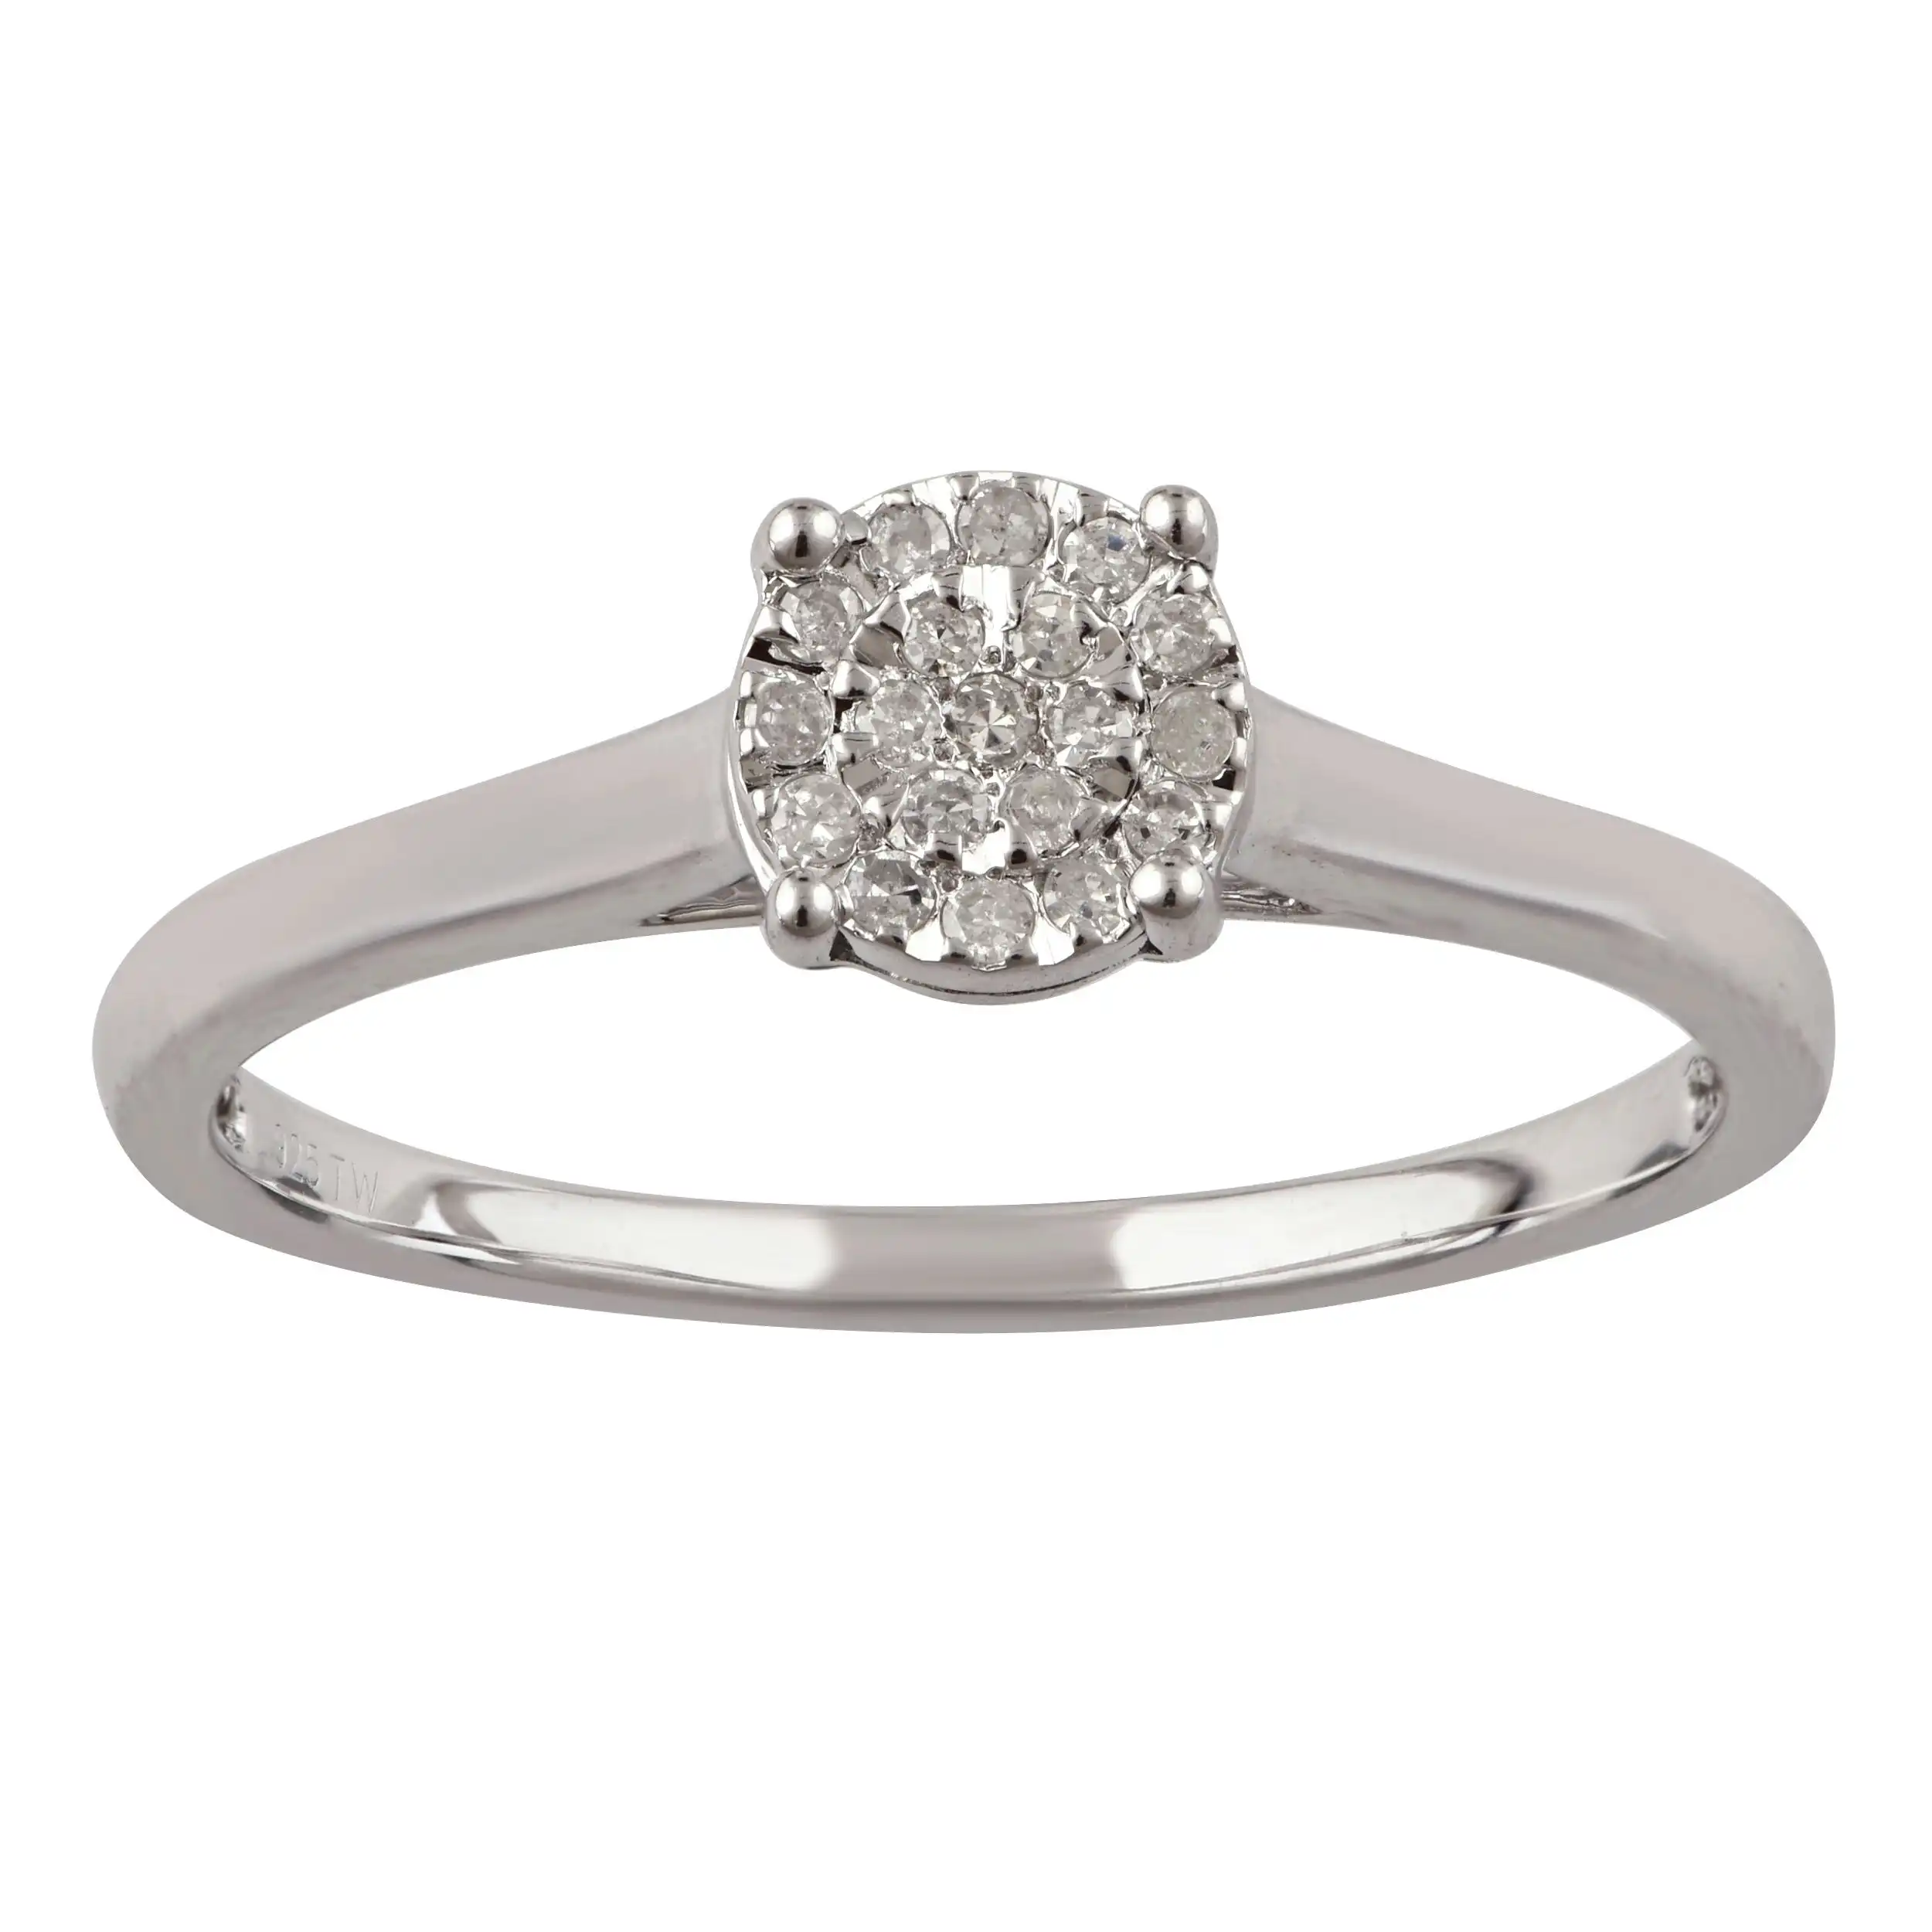 Sterling Silver 10 Points Diamond Ring with Brilliant Cut Diamonds and "1 Carat Look"